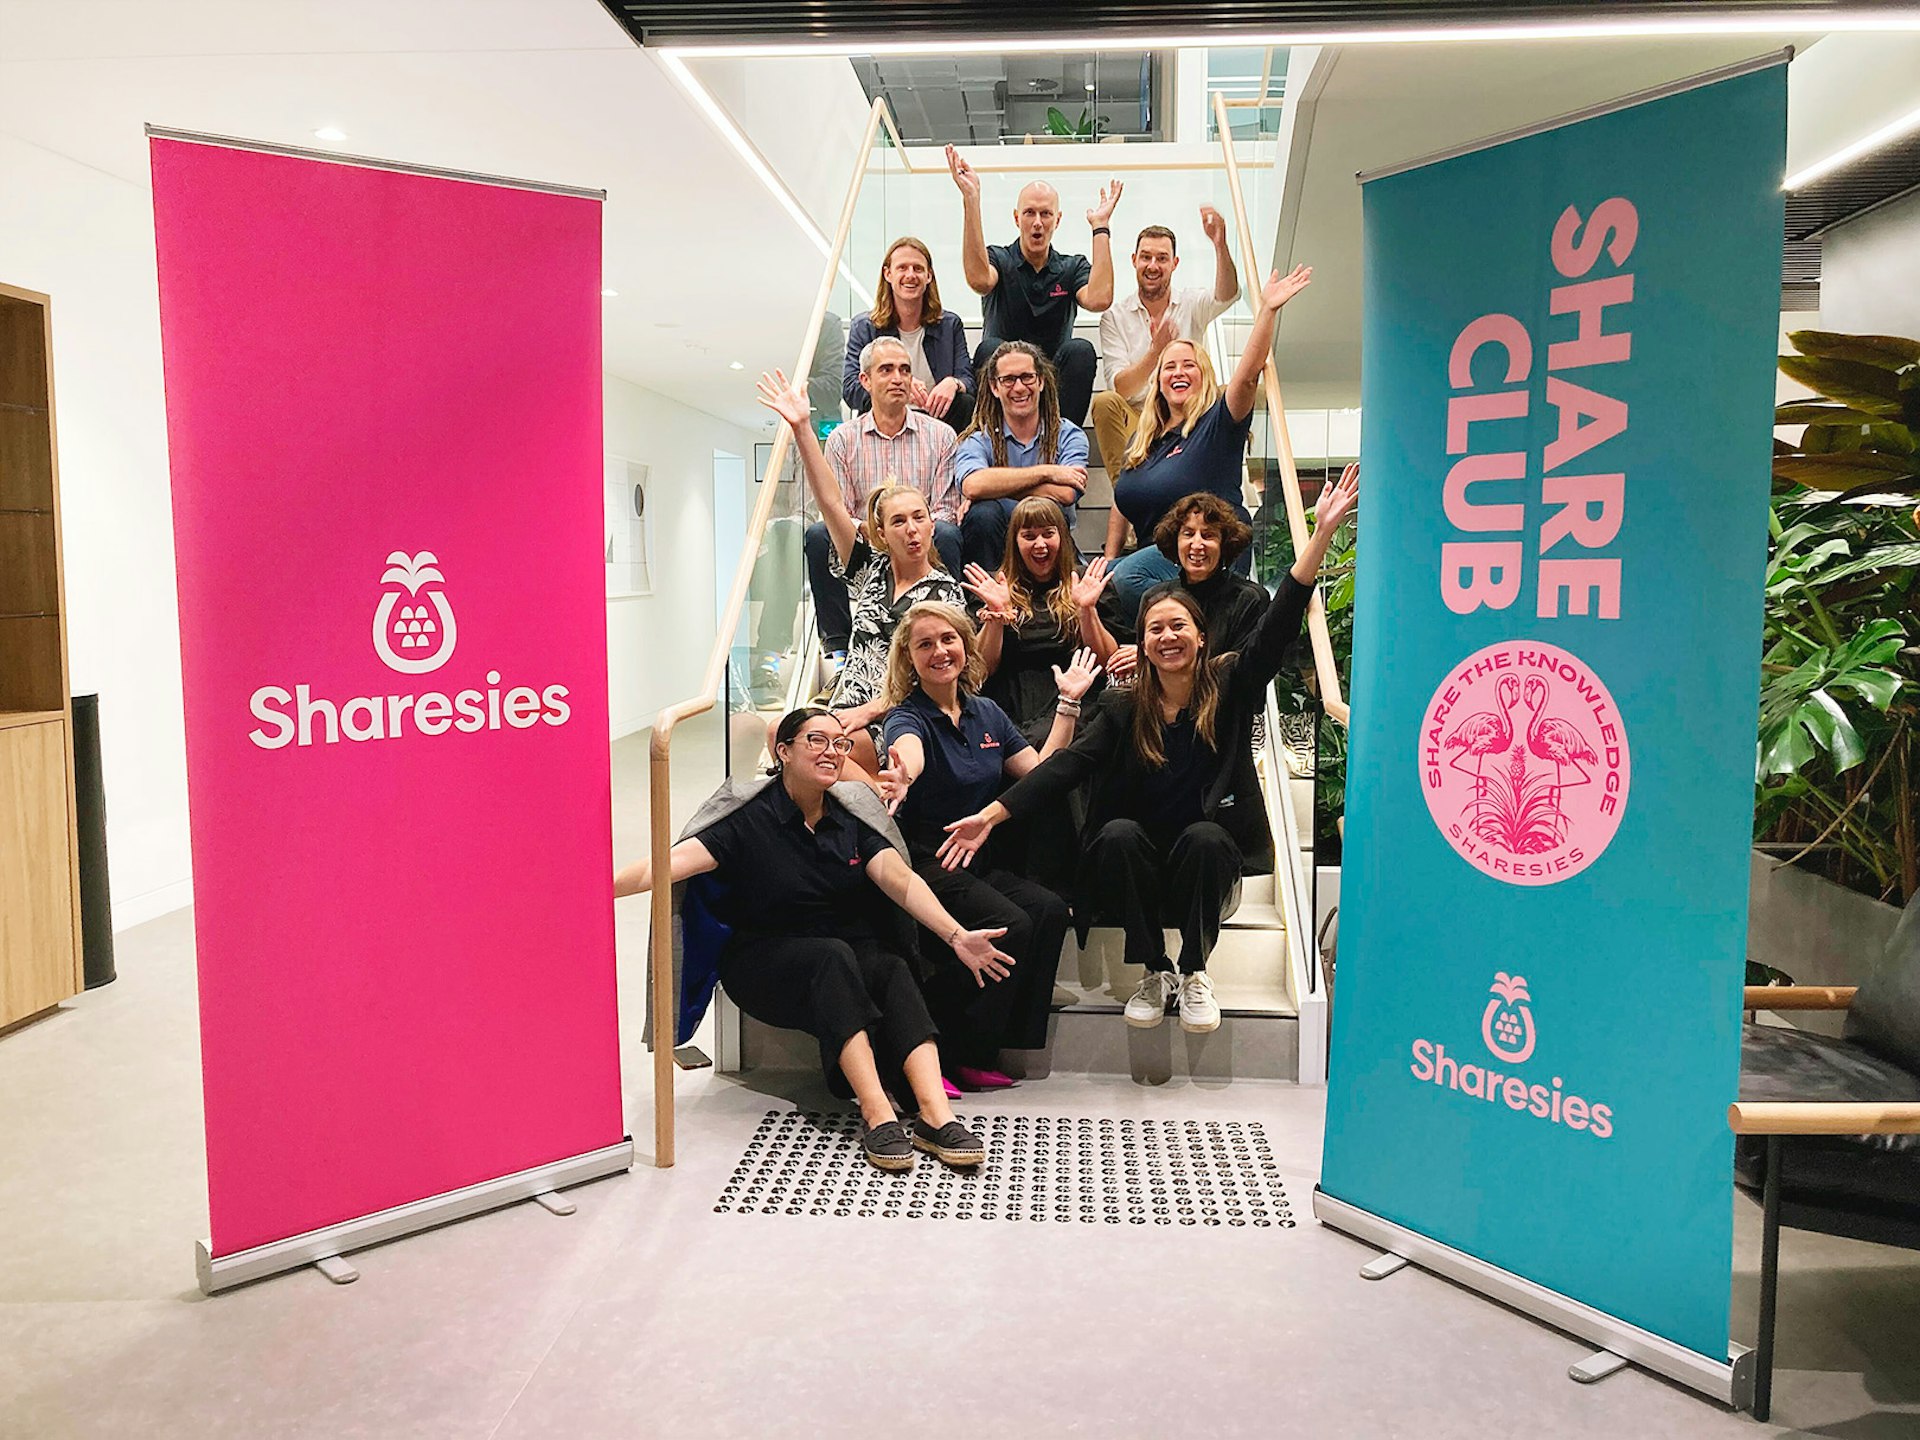 A group of people from the Sharesies team sitting on the stairs smiling